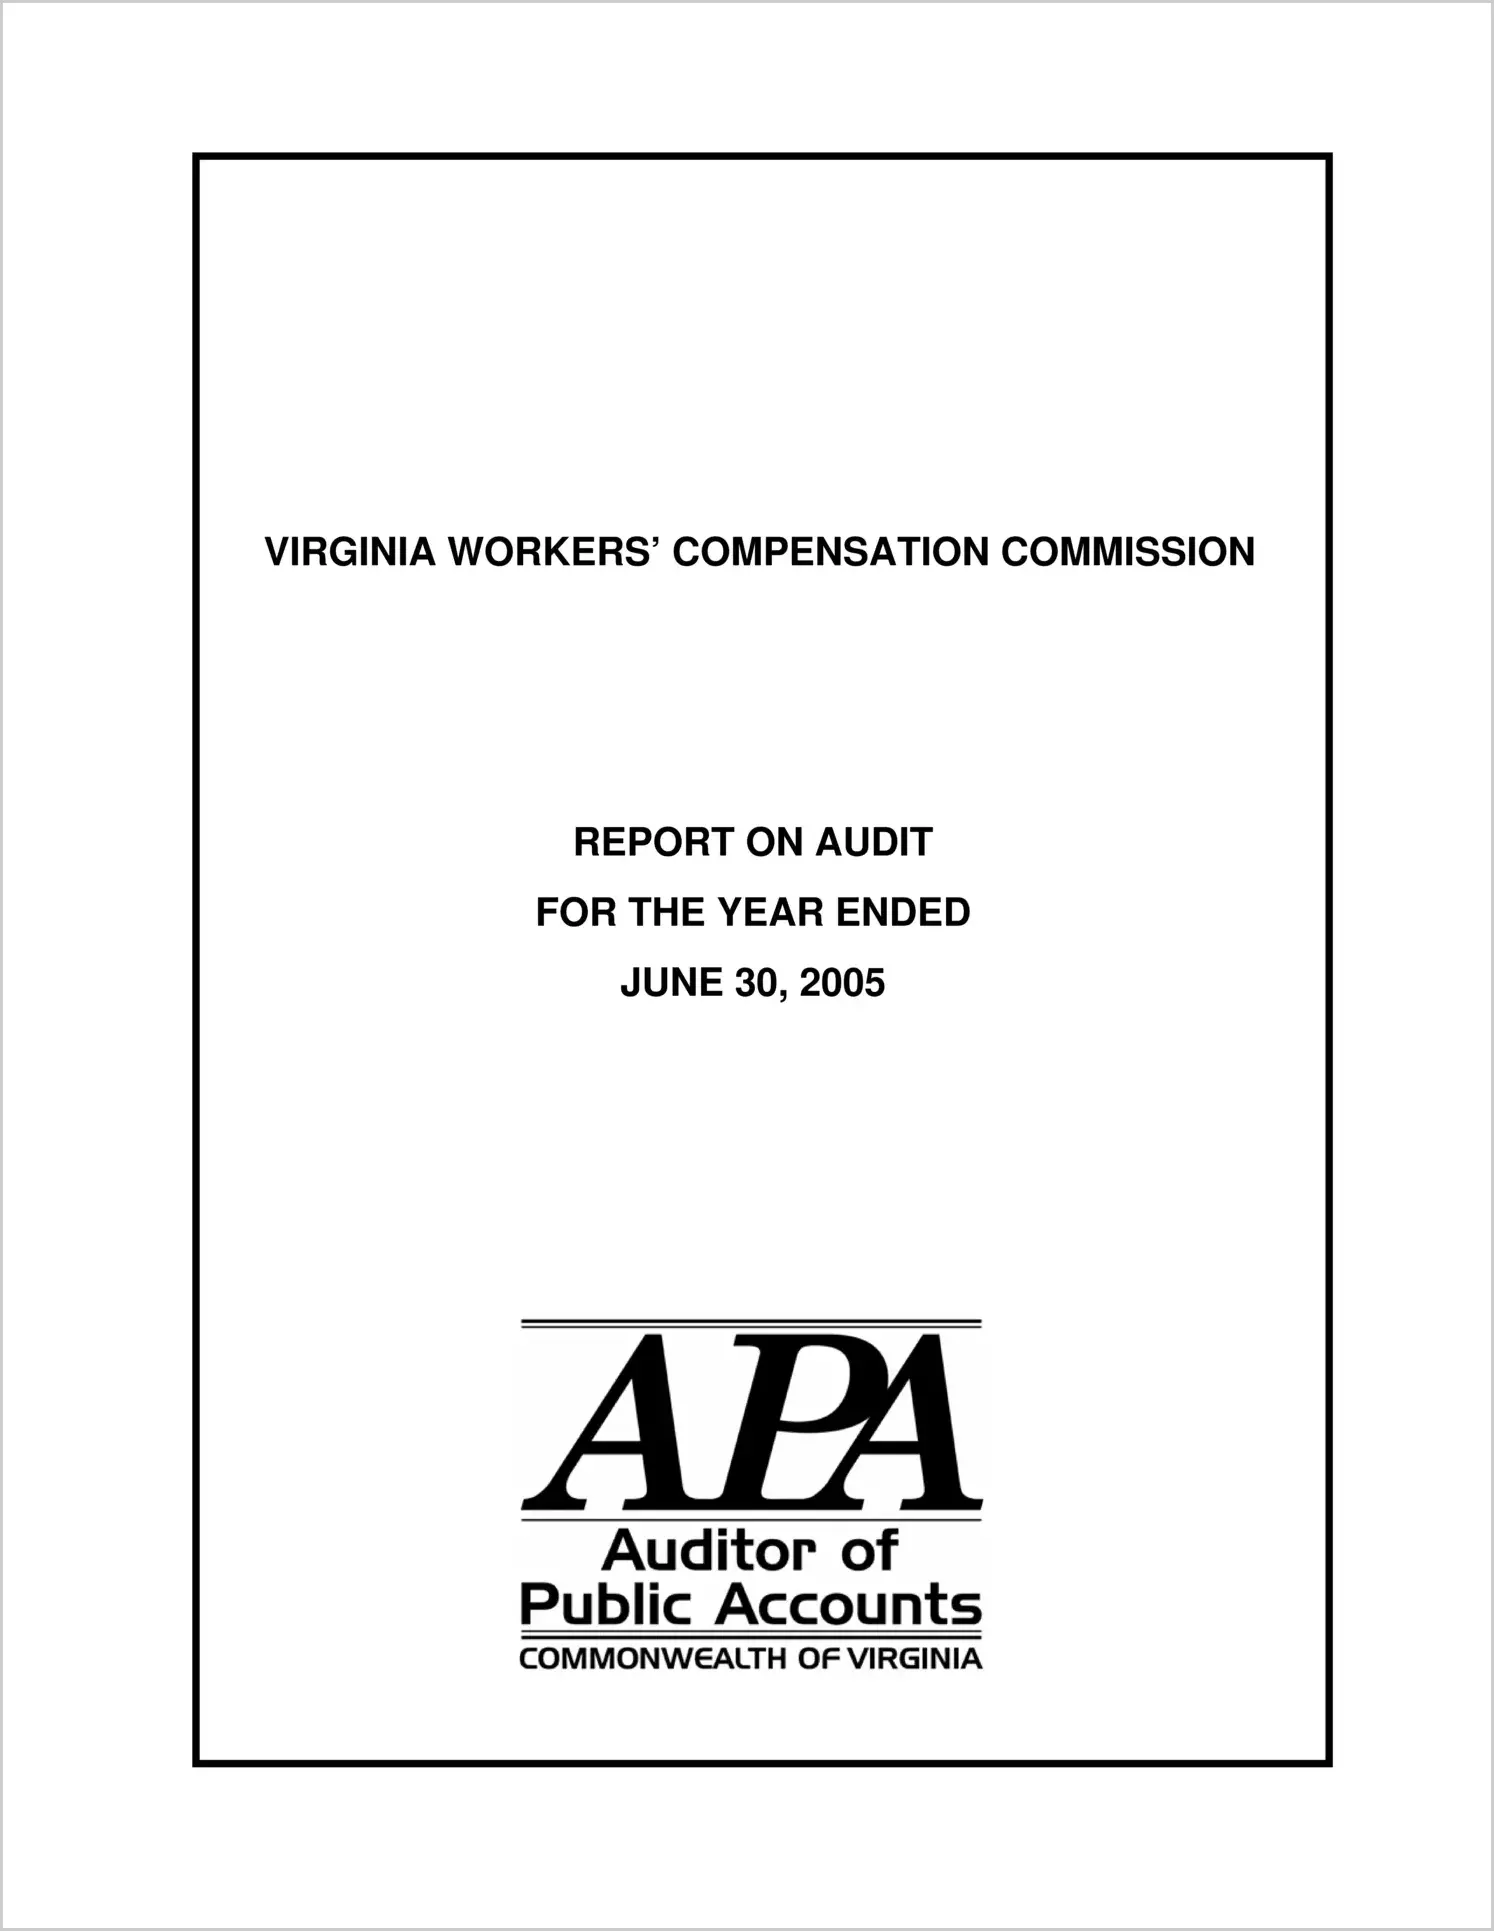 Virginia Workers` Compensation Commission for the year ended June 30, 2005